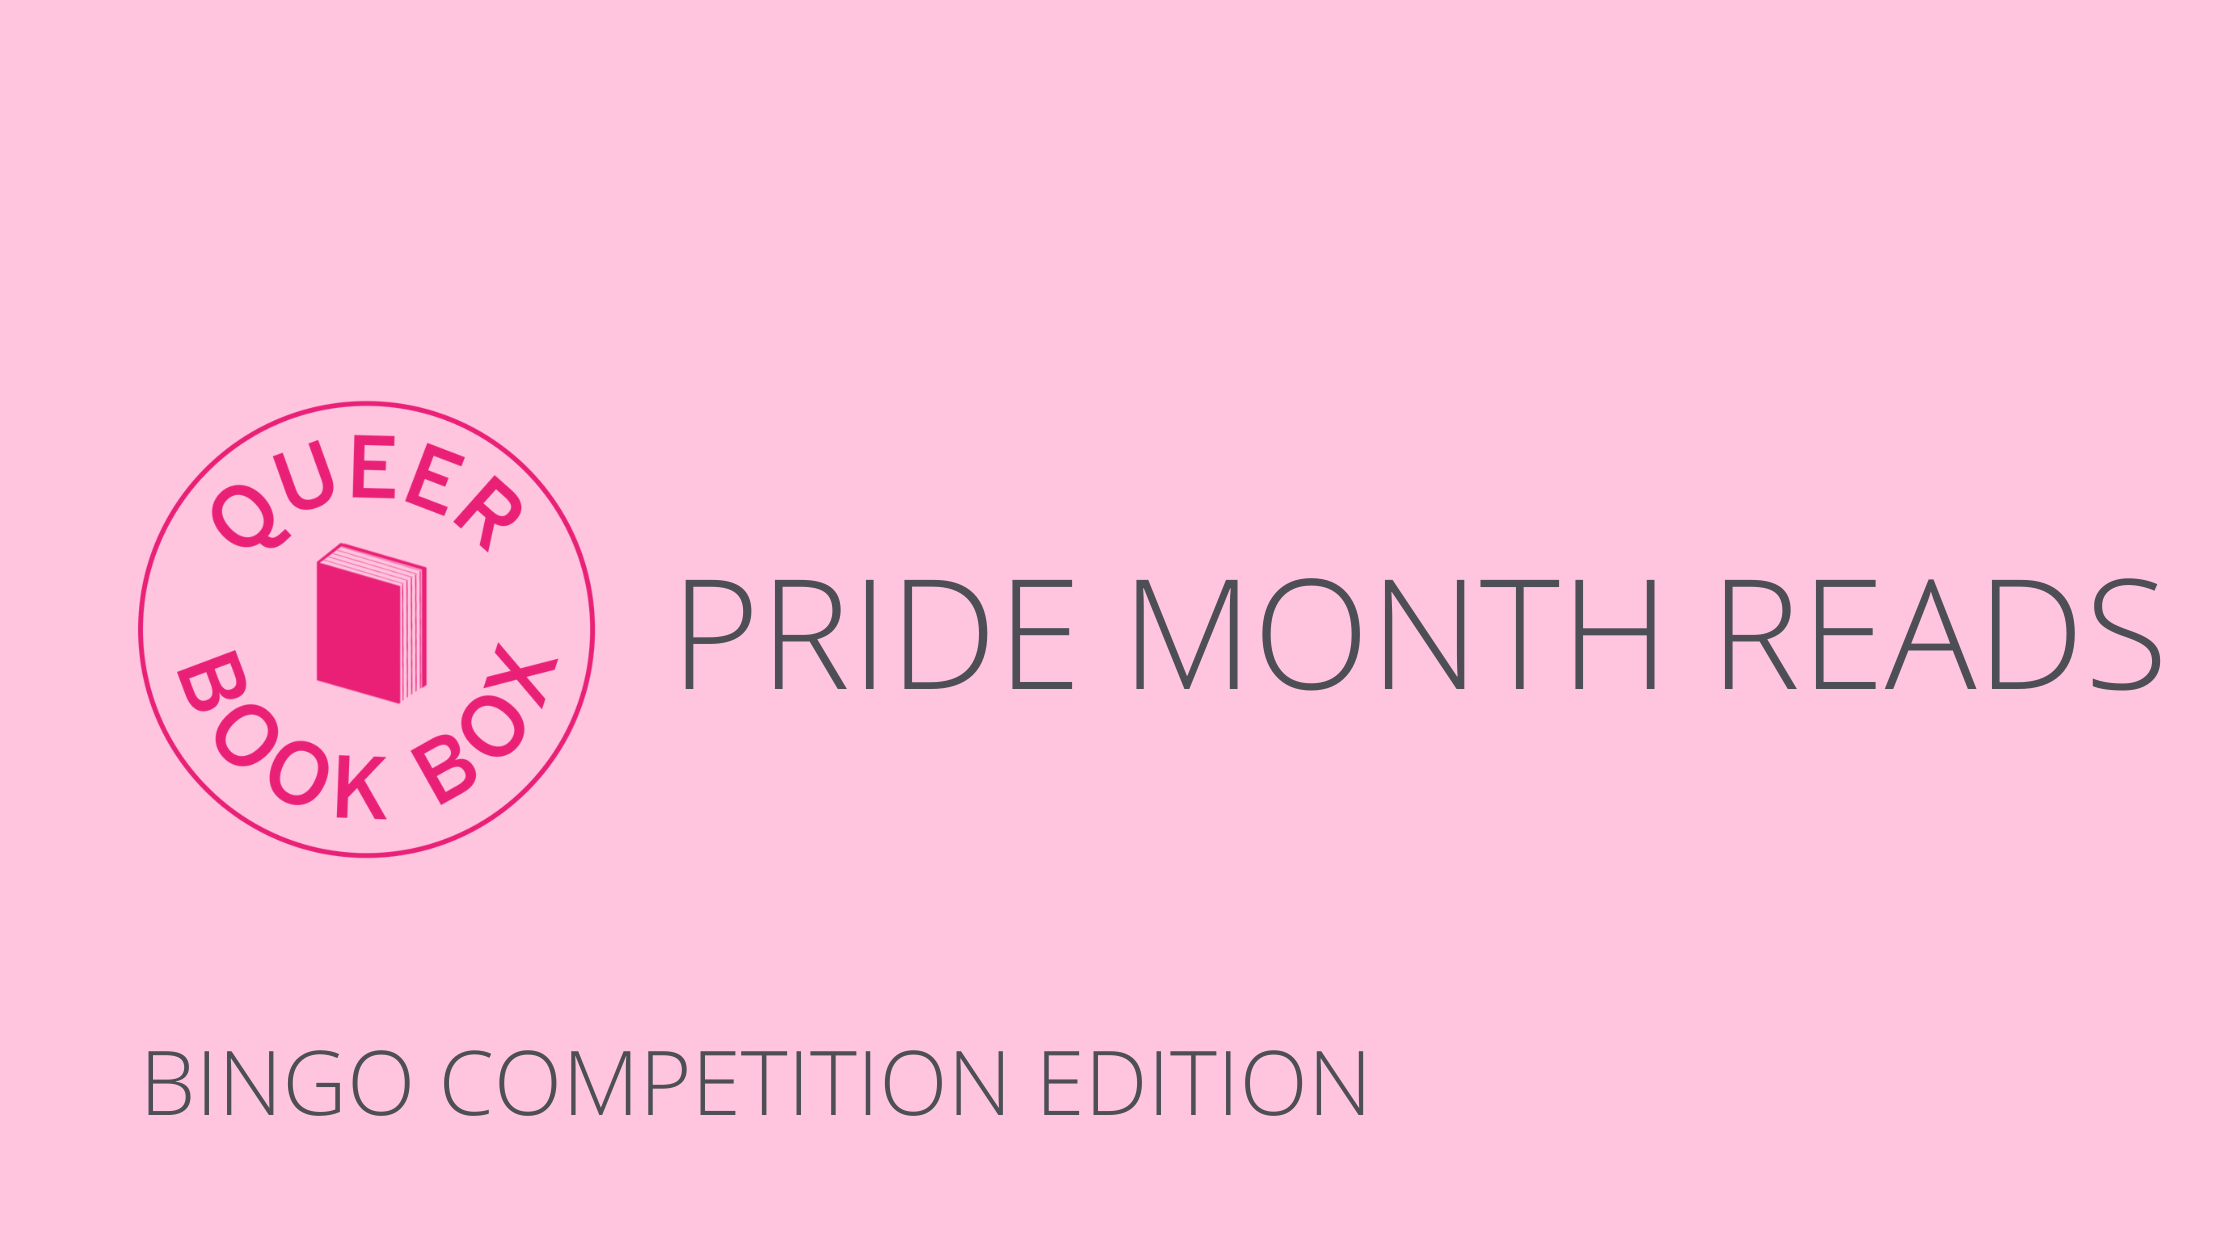 Pride Month Reads: Bingo competition edition!